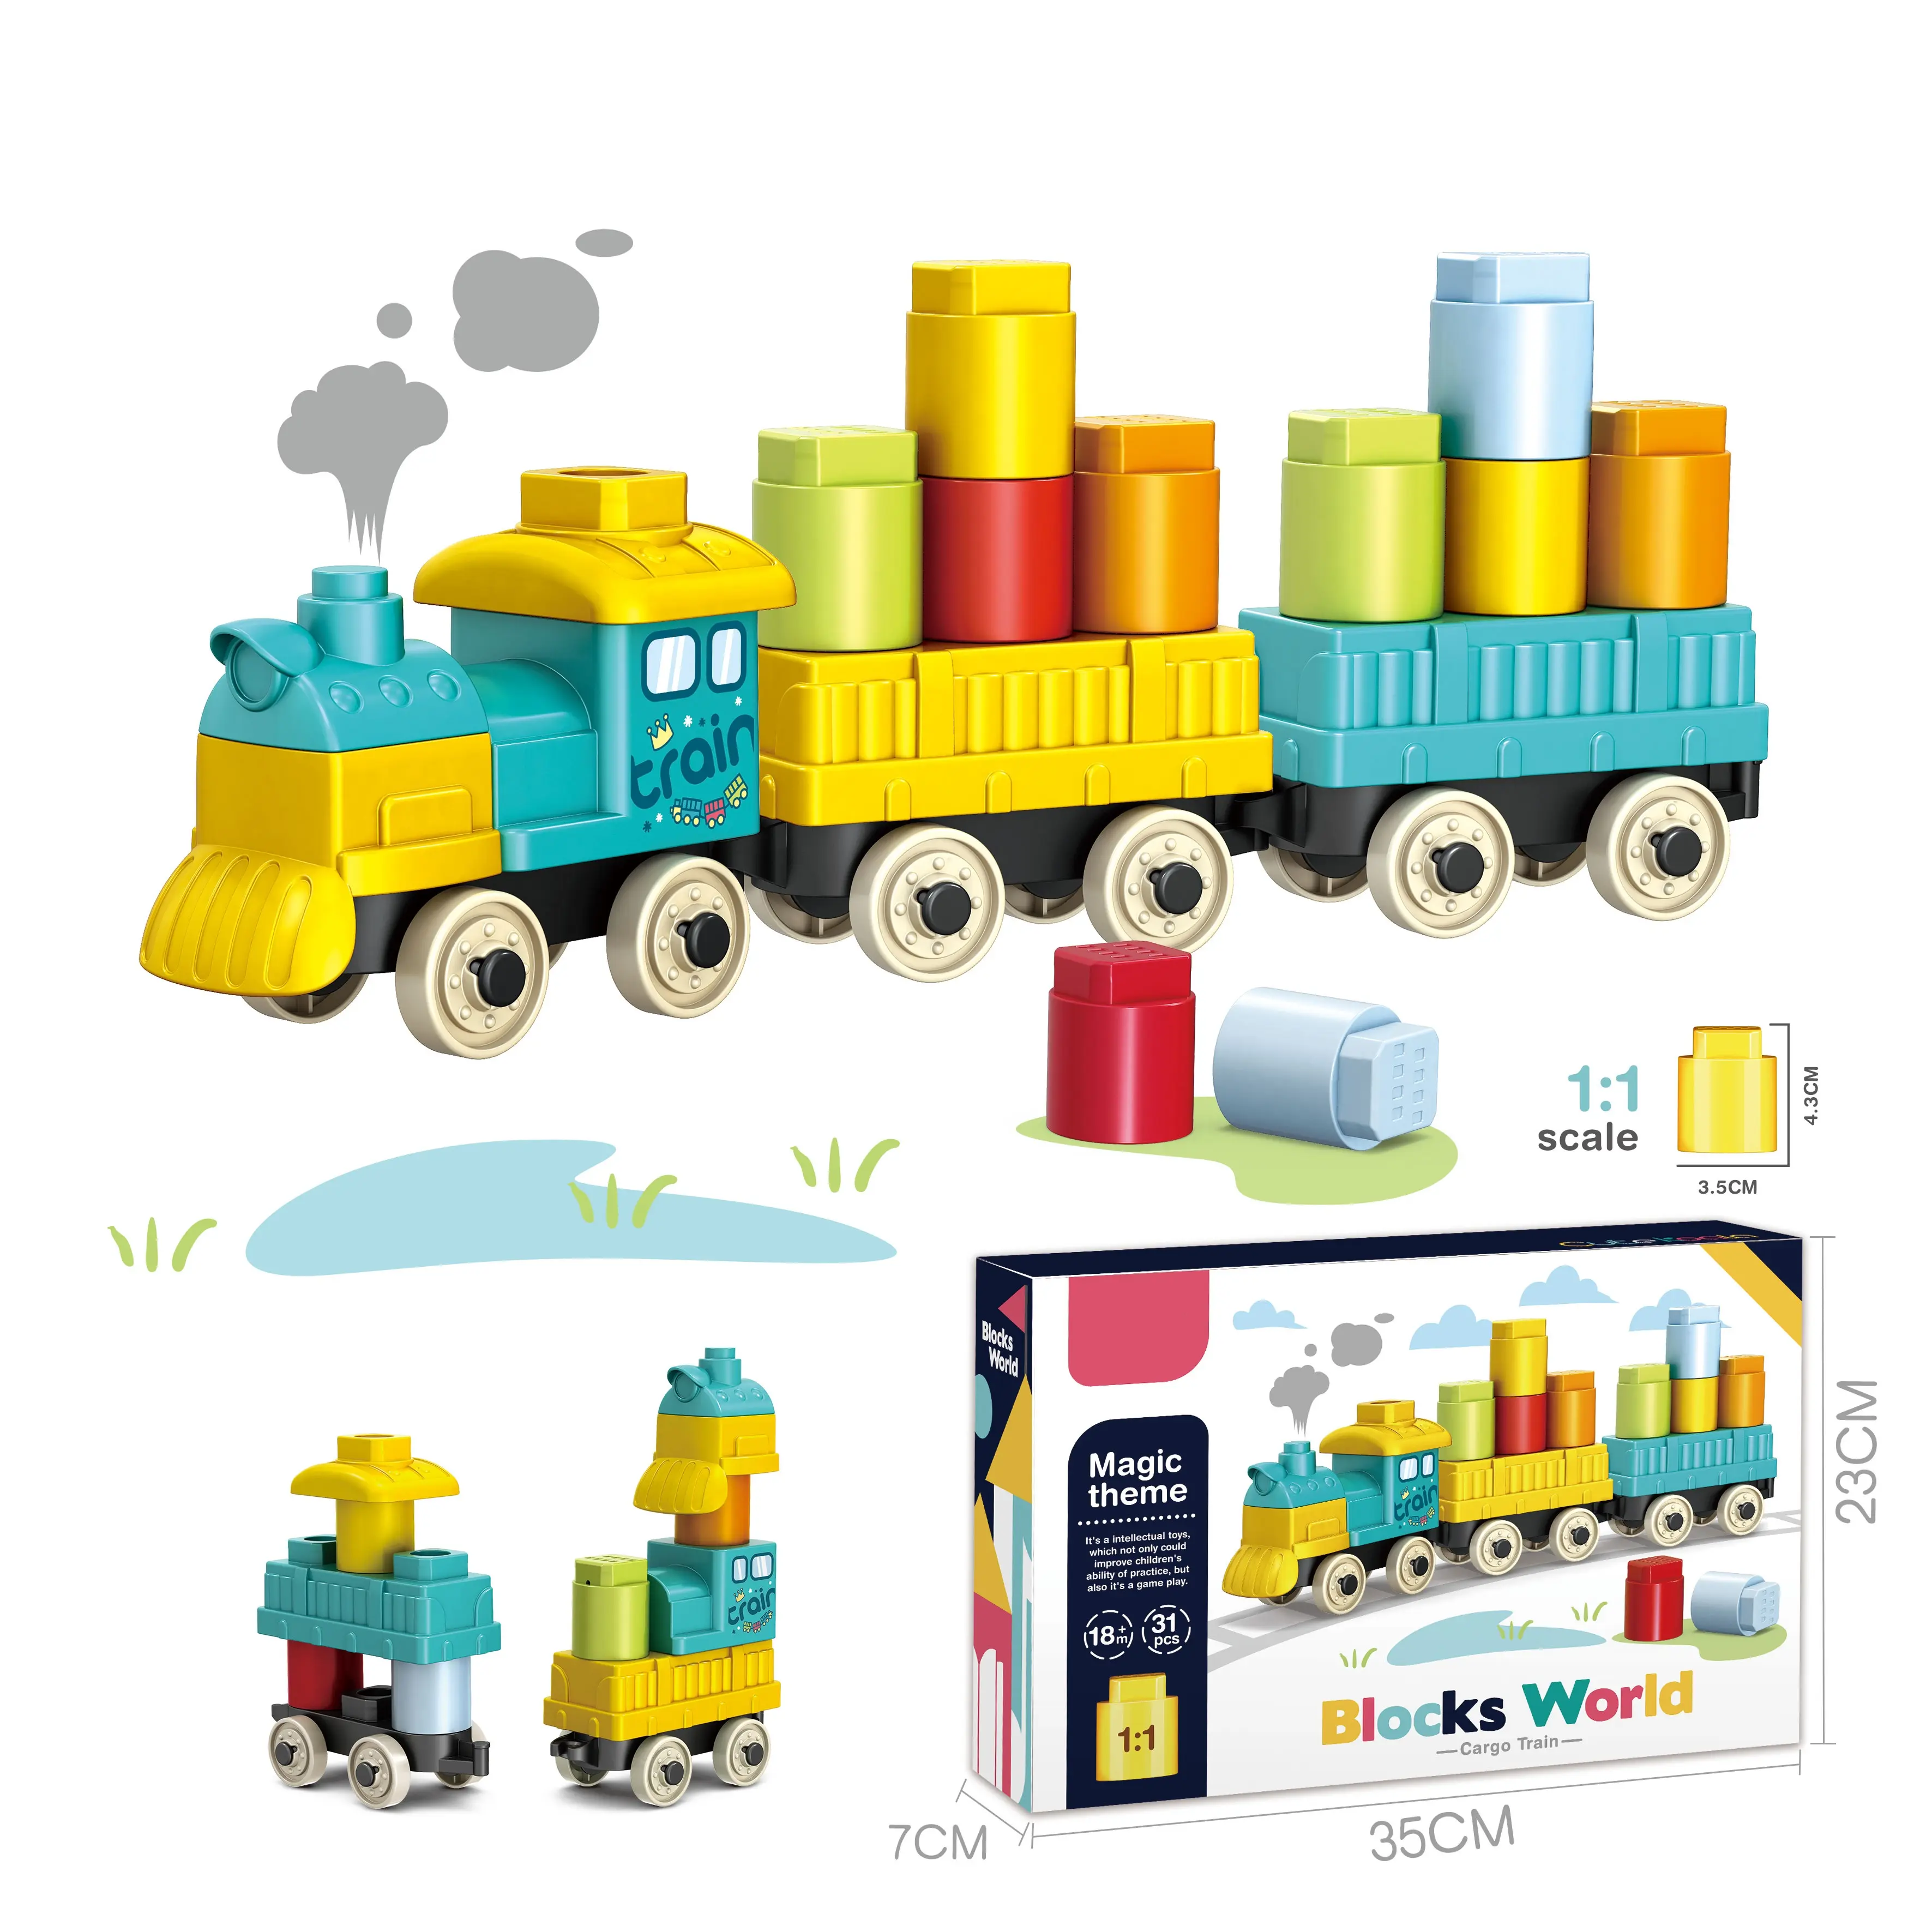 Colorful Train Building Big Block Set for Children to Build and Play Educational Games